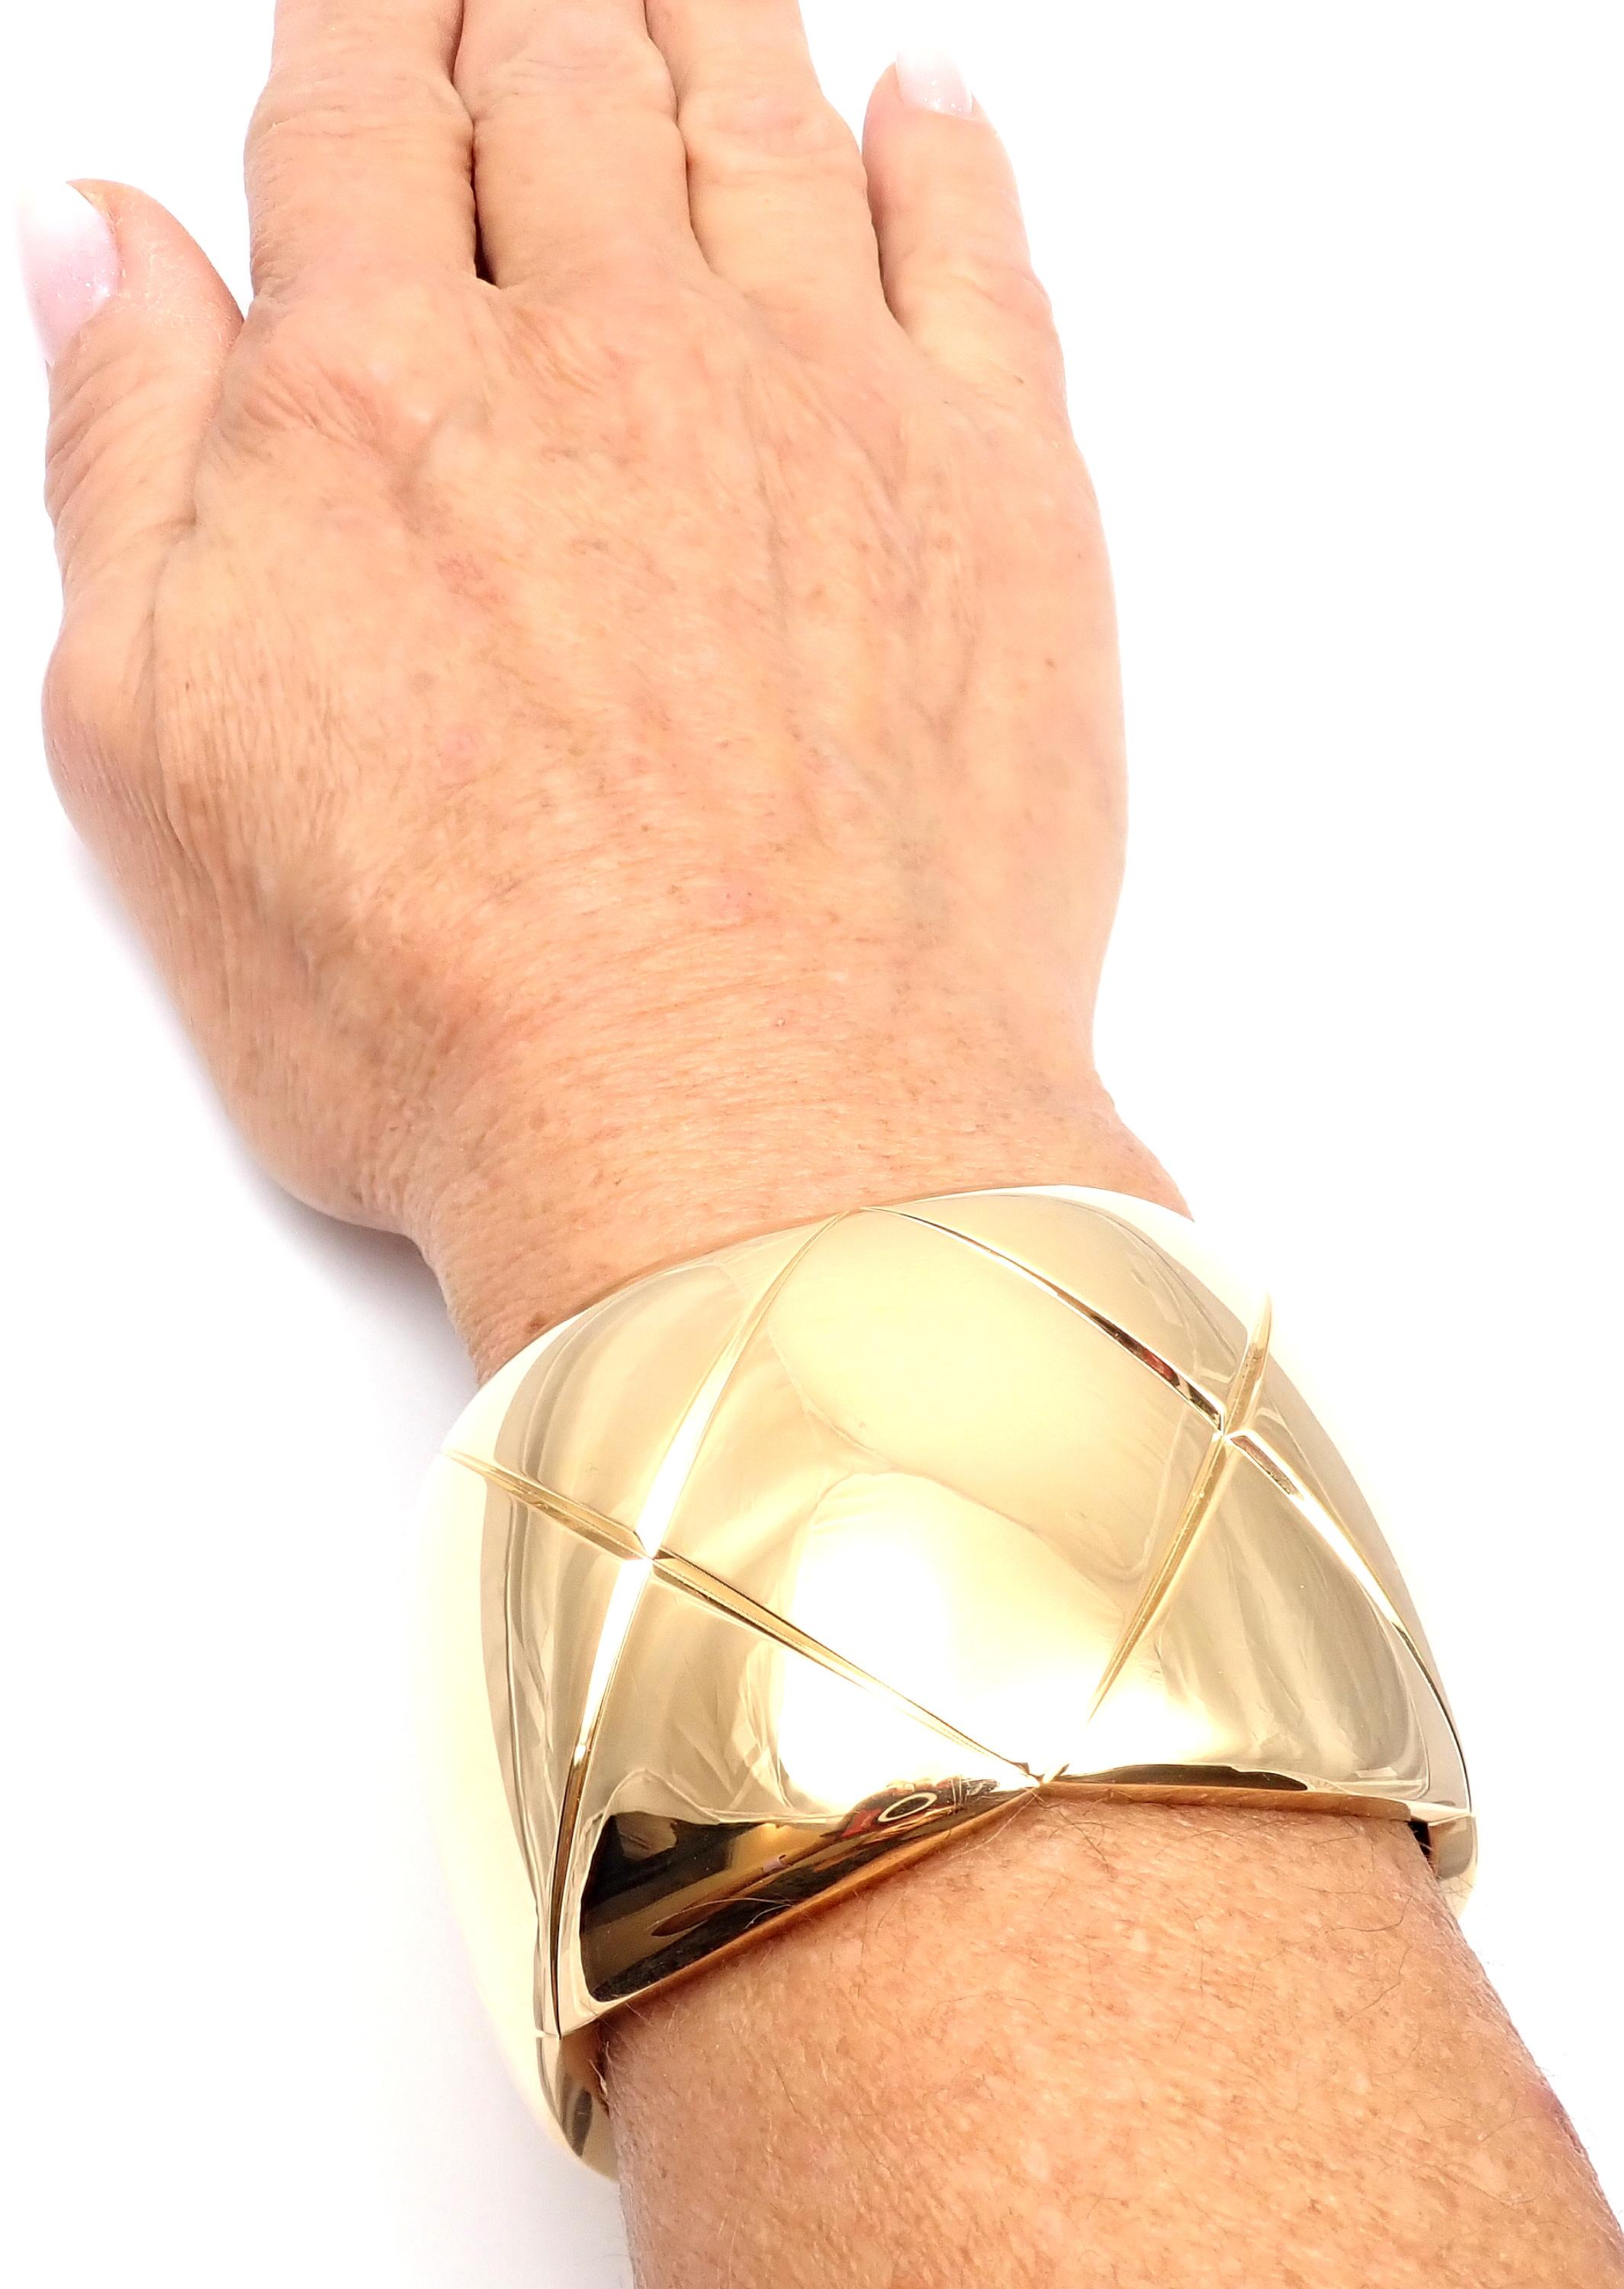 Chanel Coco Crush Yellow Gold Cuff Bangle Bracelet In Excellent Condition In Holland, PA